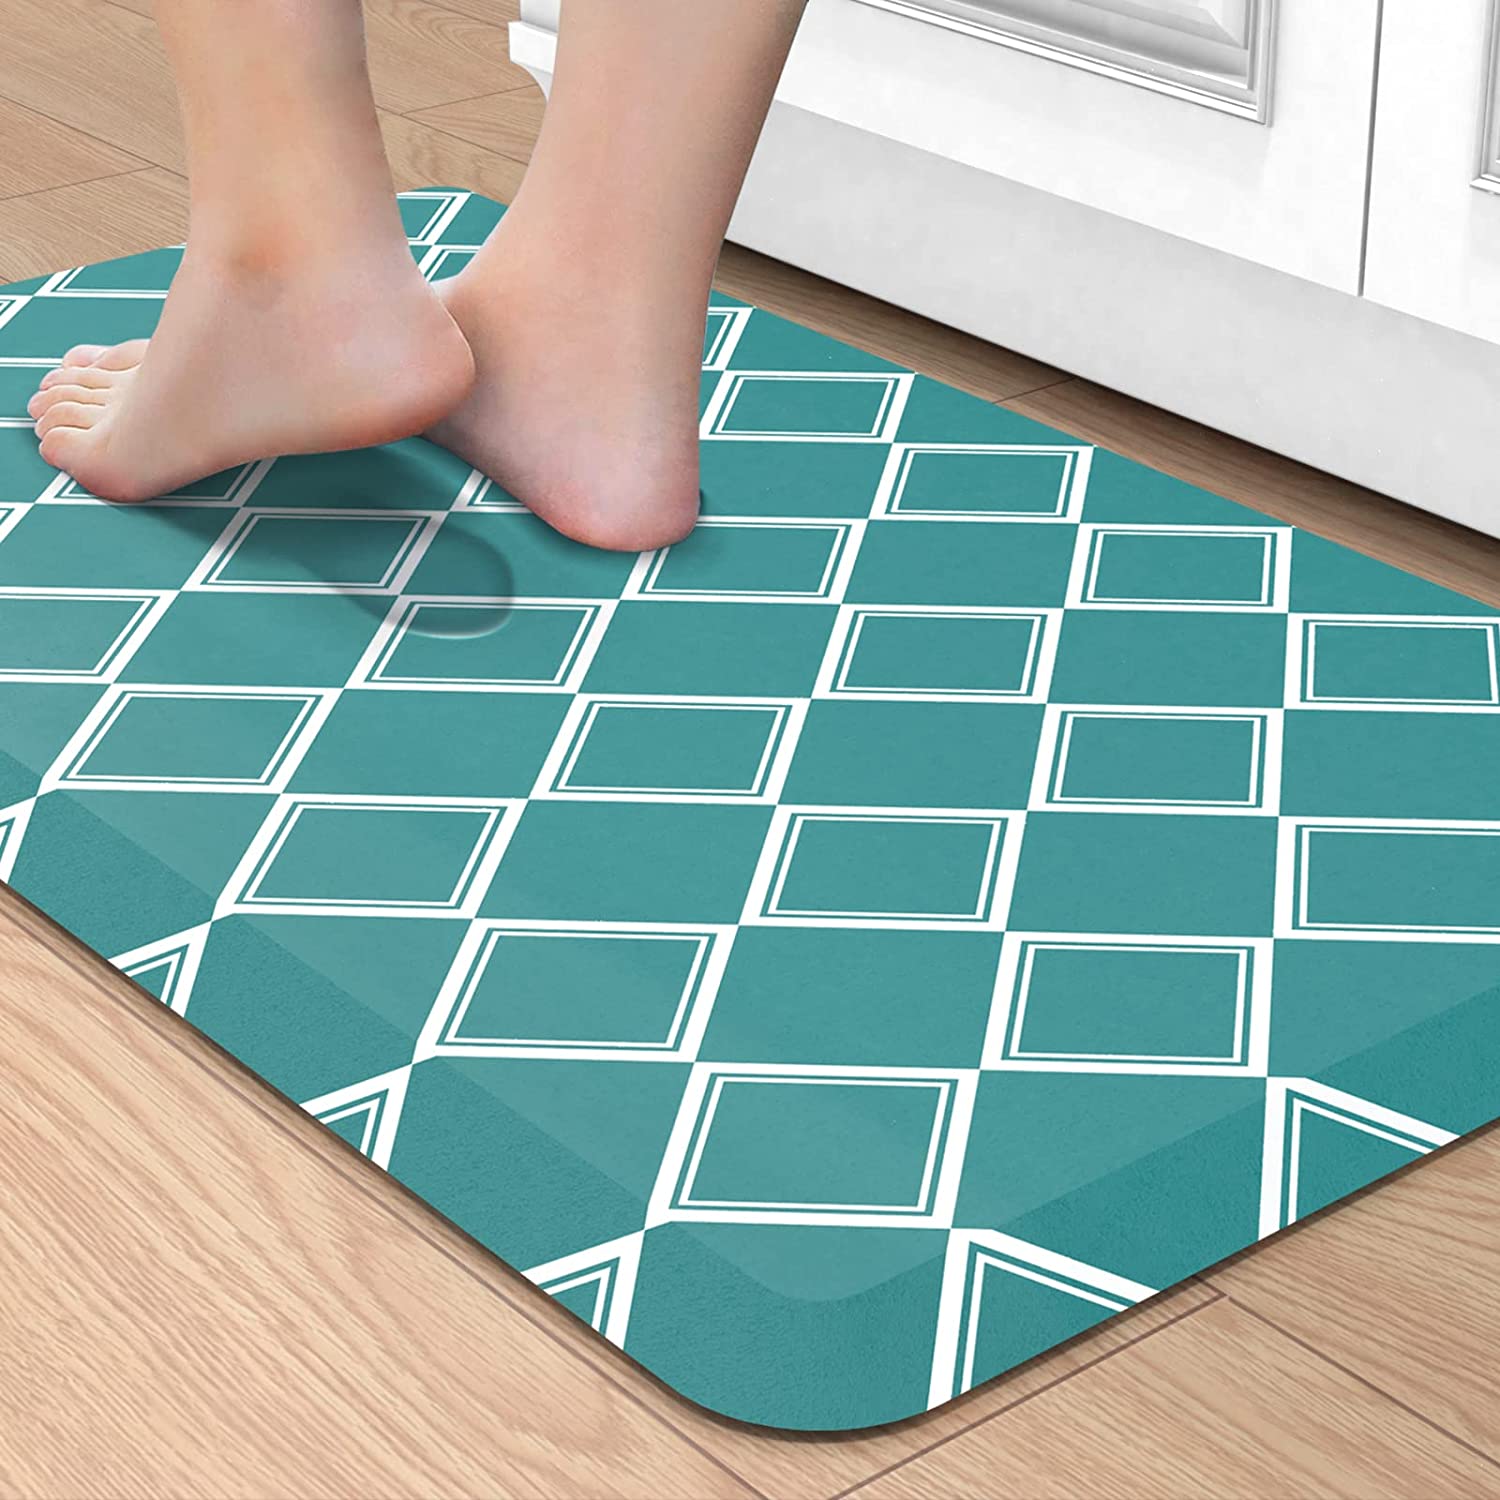 Kitsure Kitchen Mat for Cushioned Anti-Fatigue Use -  - Waterproof and Easy-to-Clean Kitchen Mat